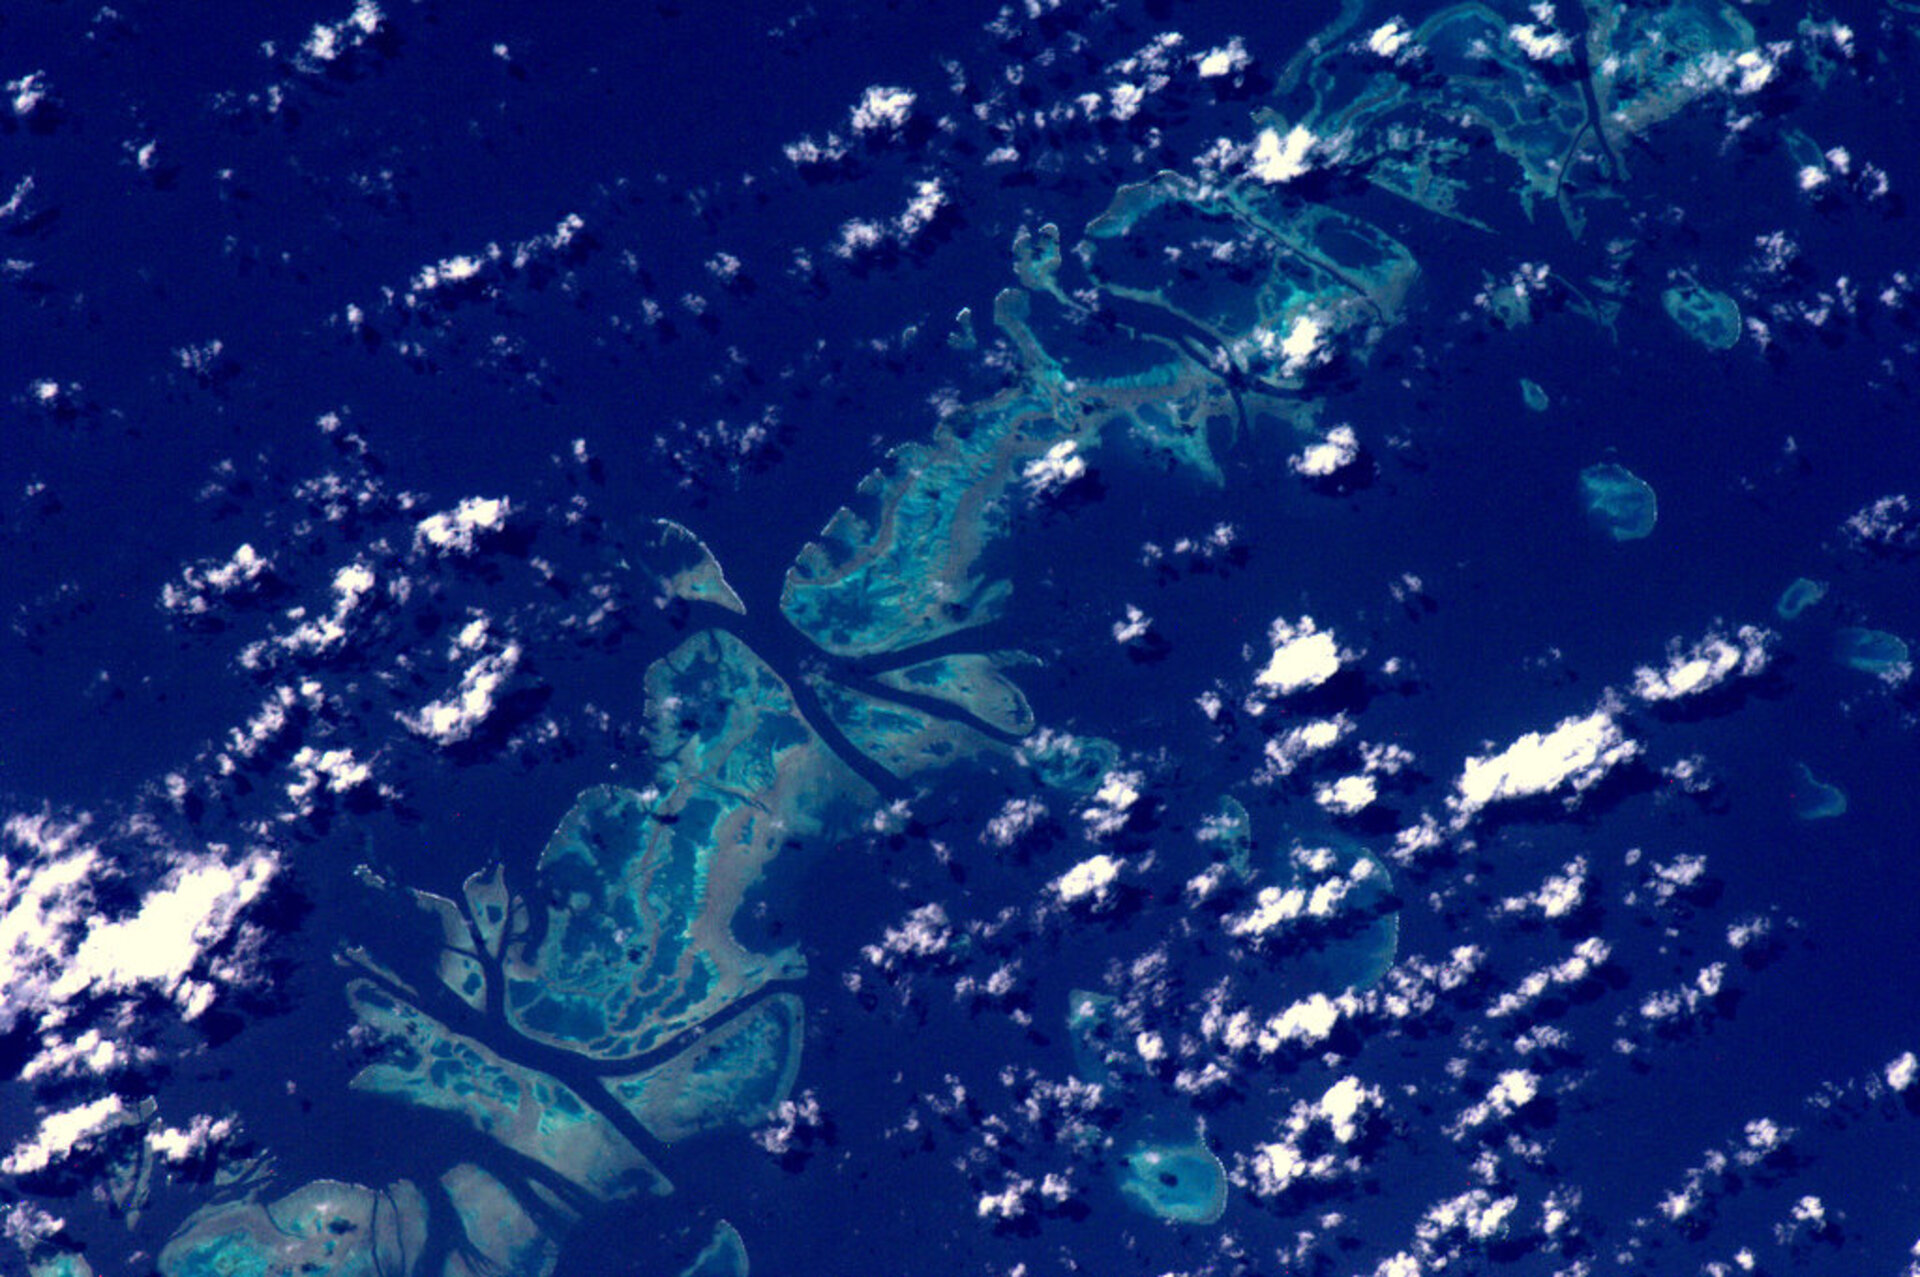 The Great Barrier Reef as seen from space